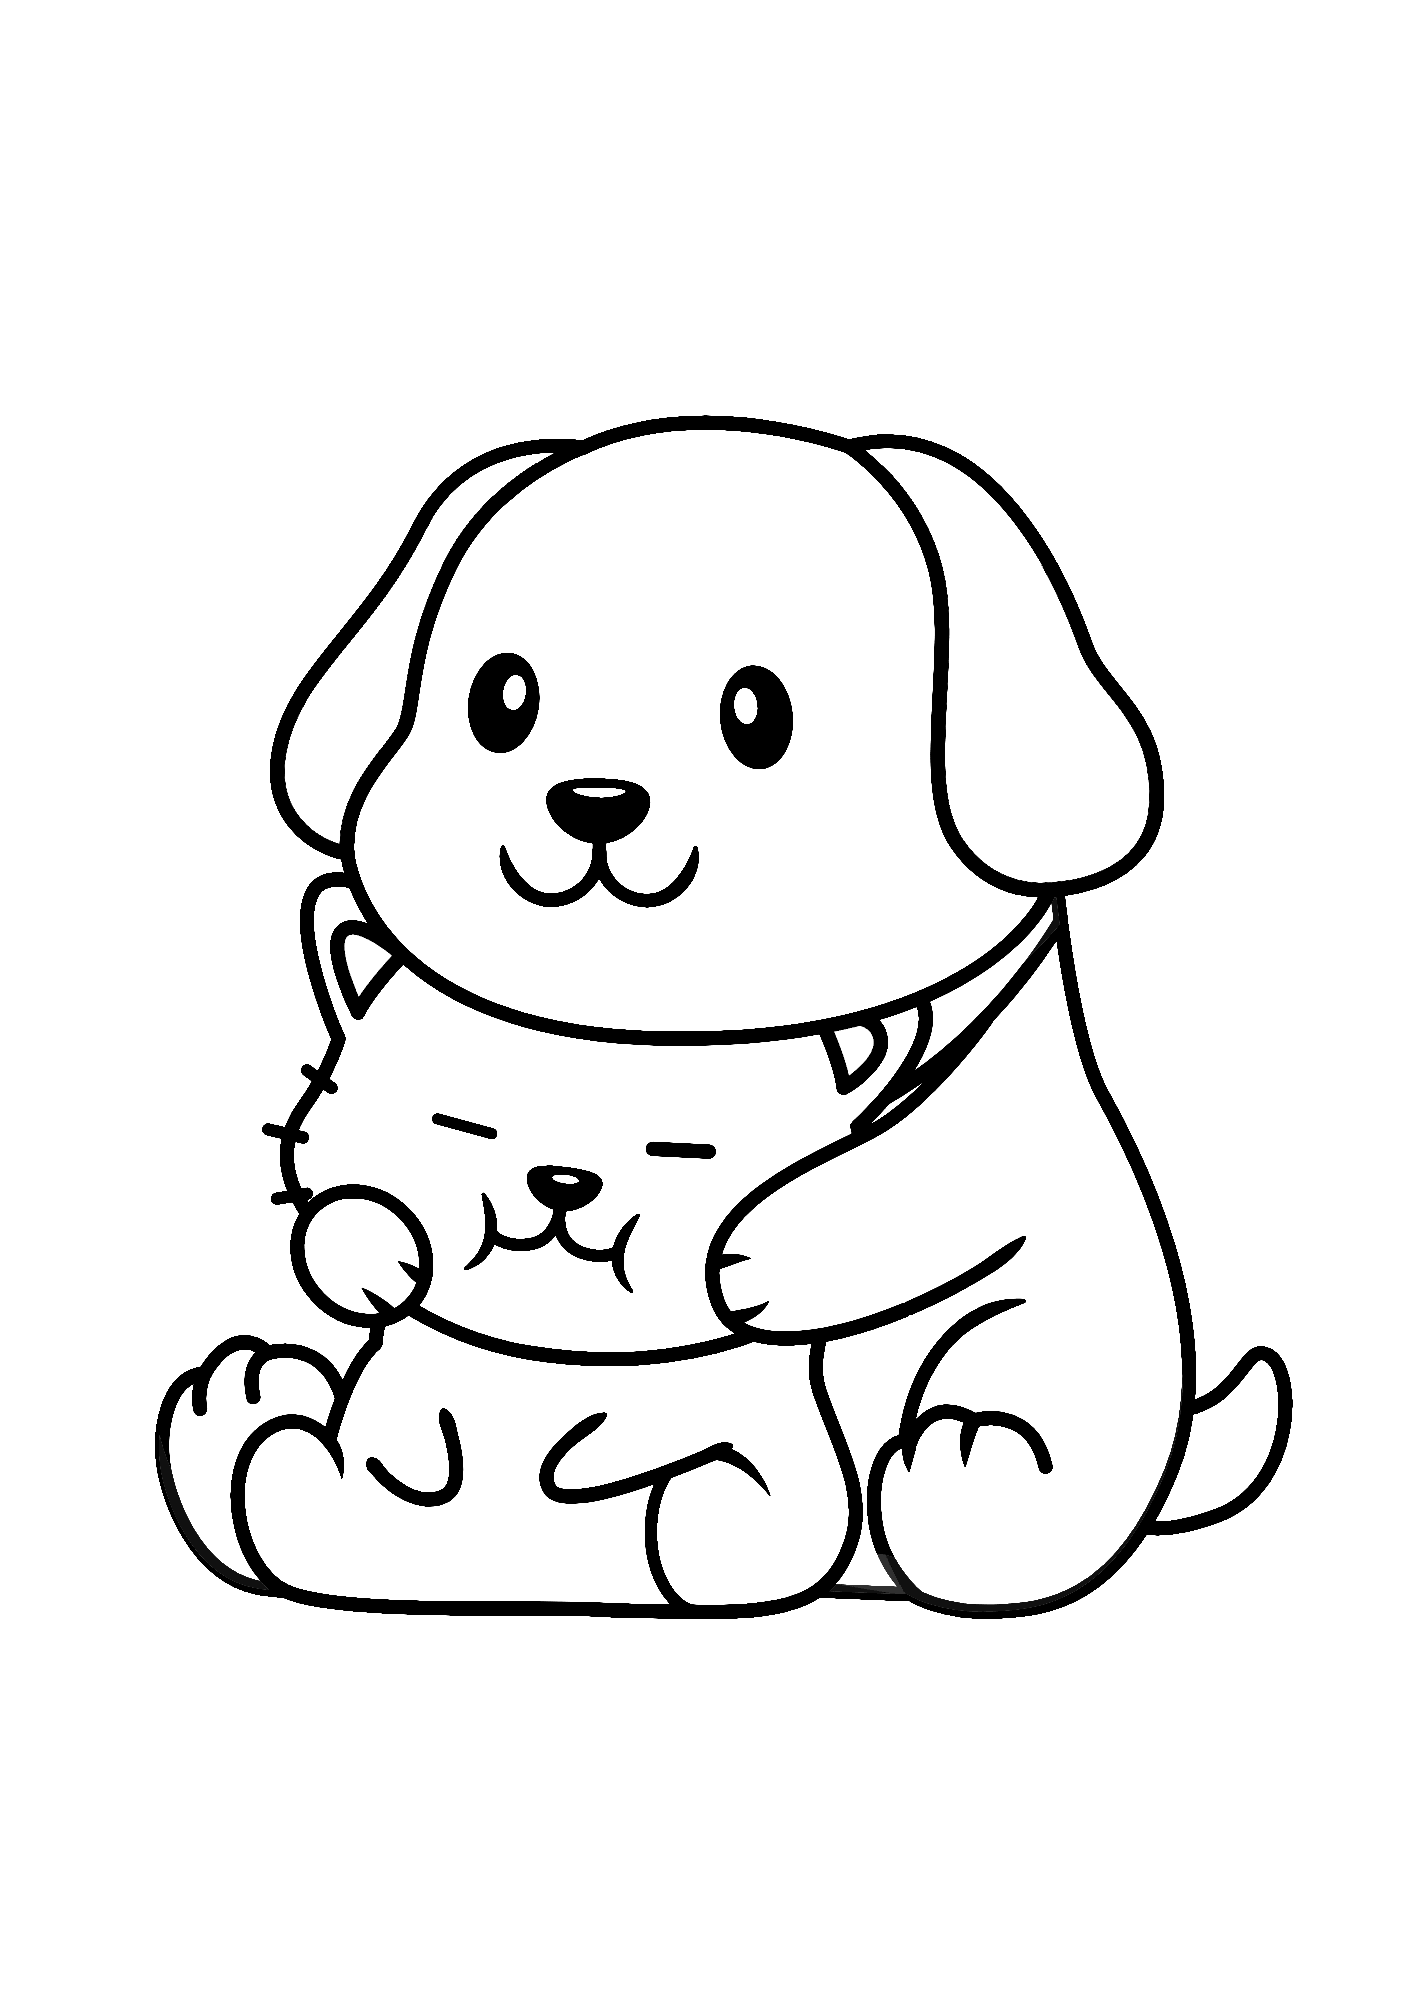 Sweet Dog Painting Coloring Pages